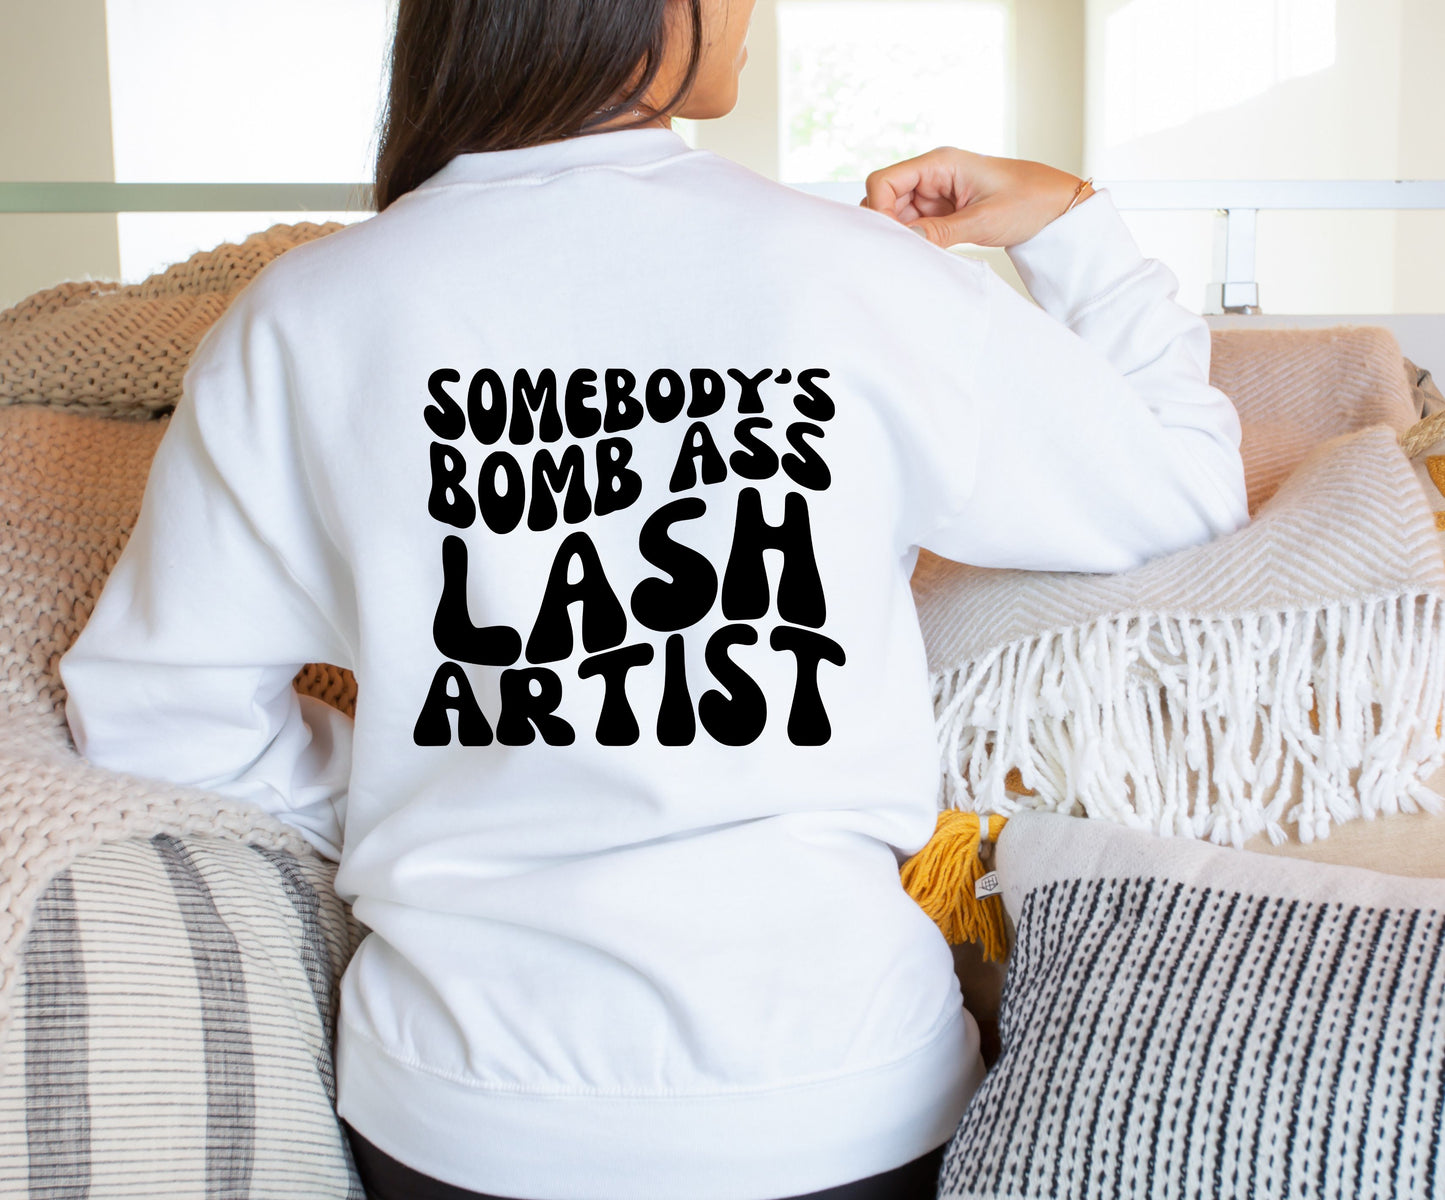 SWEATSHIRT or T-SHIRT-  SOMEBODY'S BOMB ASS LASH ARTIST ( front and back )